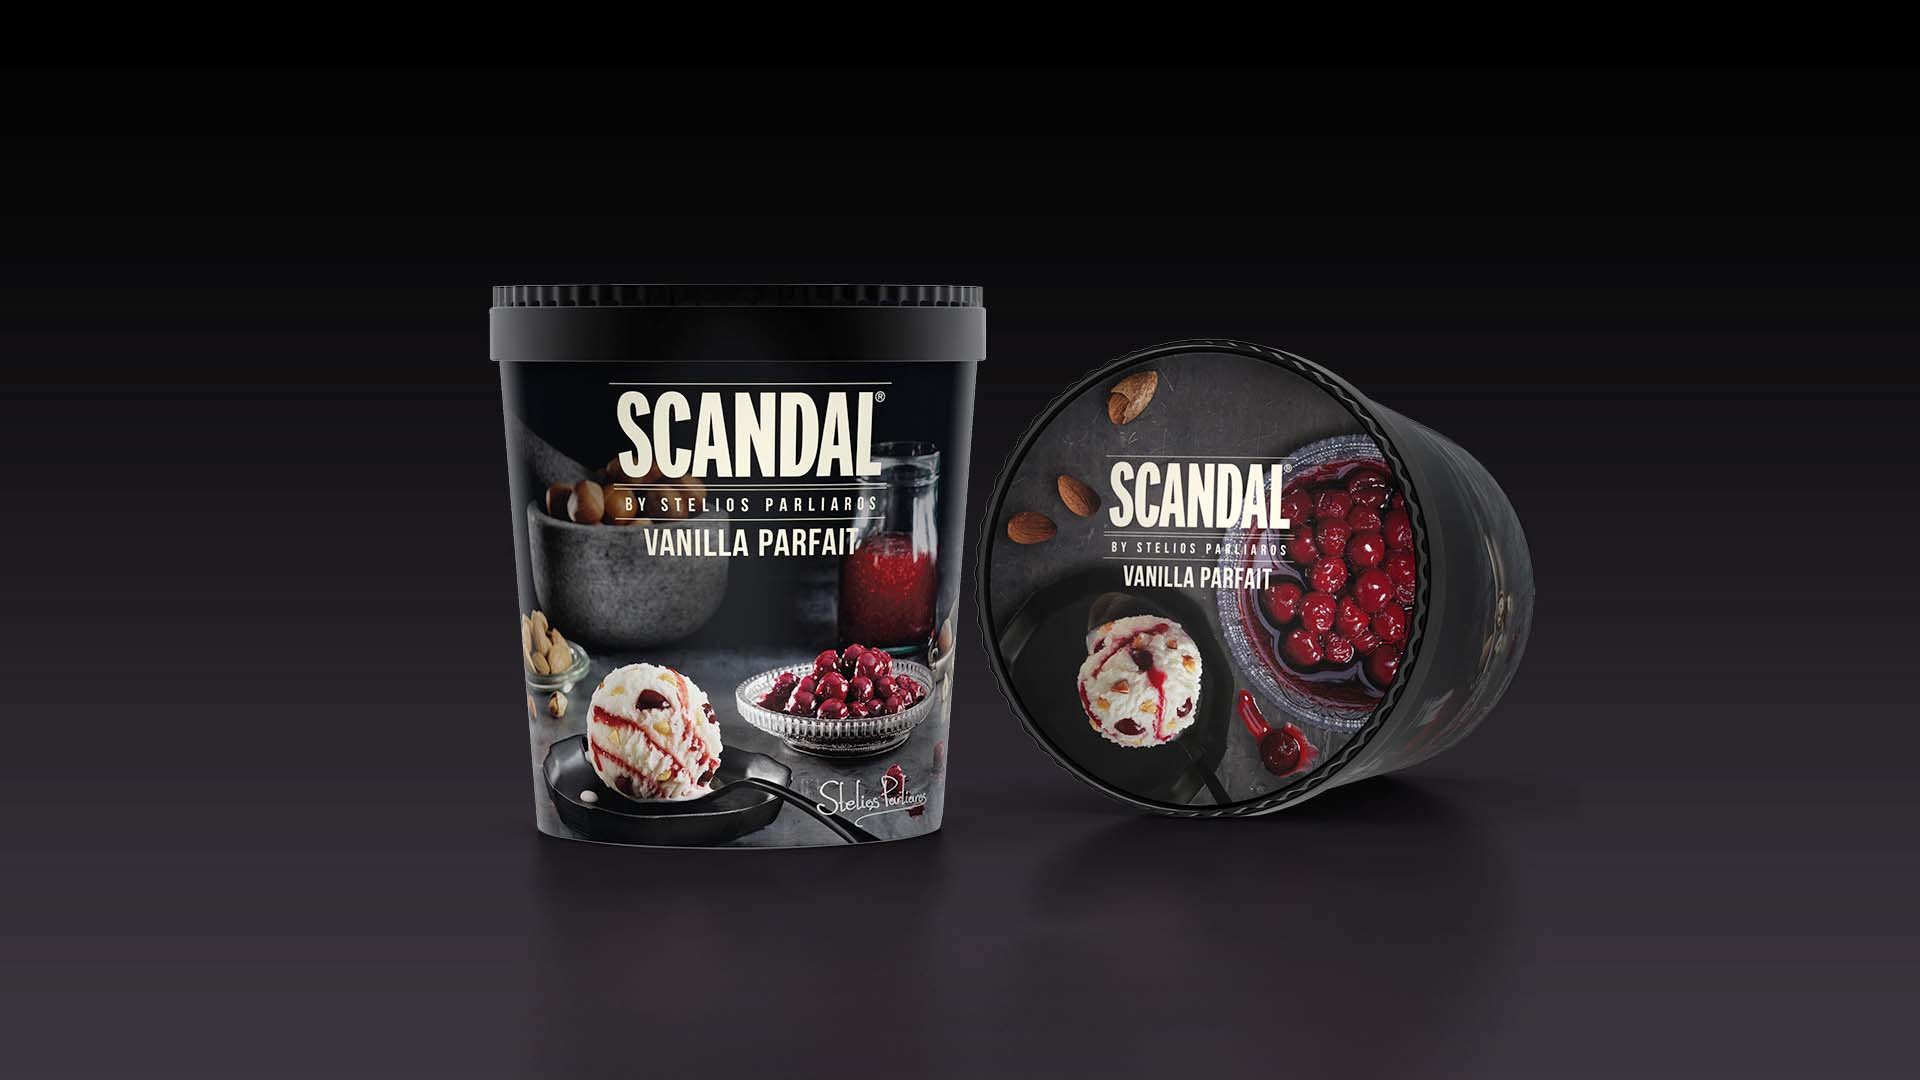 Scandal by Stelios Parliaros Vanilla parfait ice cream packaging design and lid